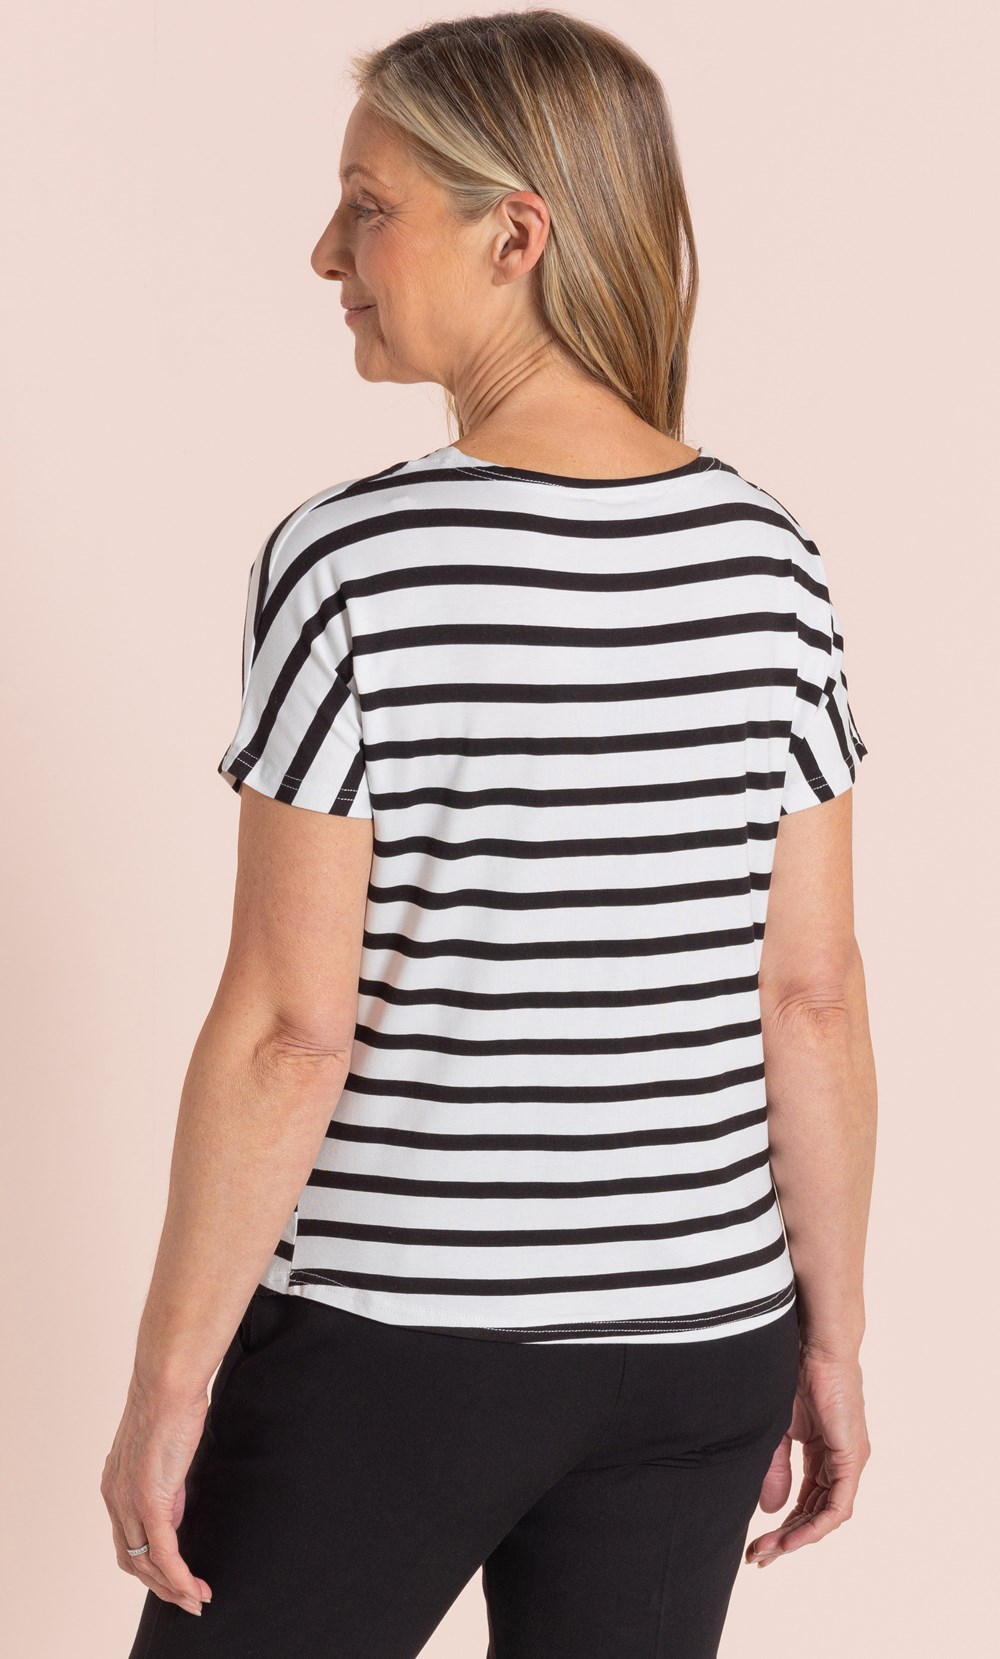 Anna Rose Floral And Stripe Print Top